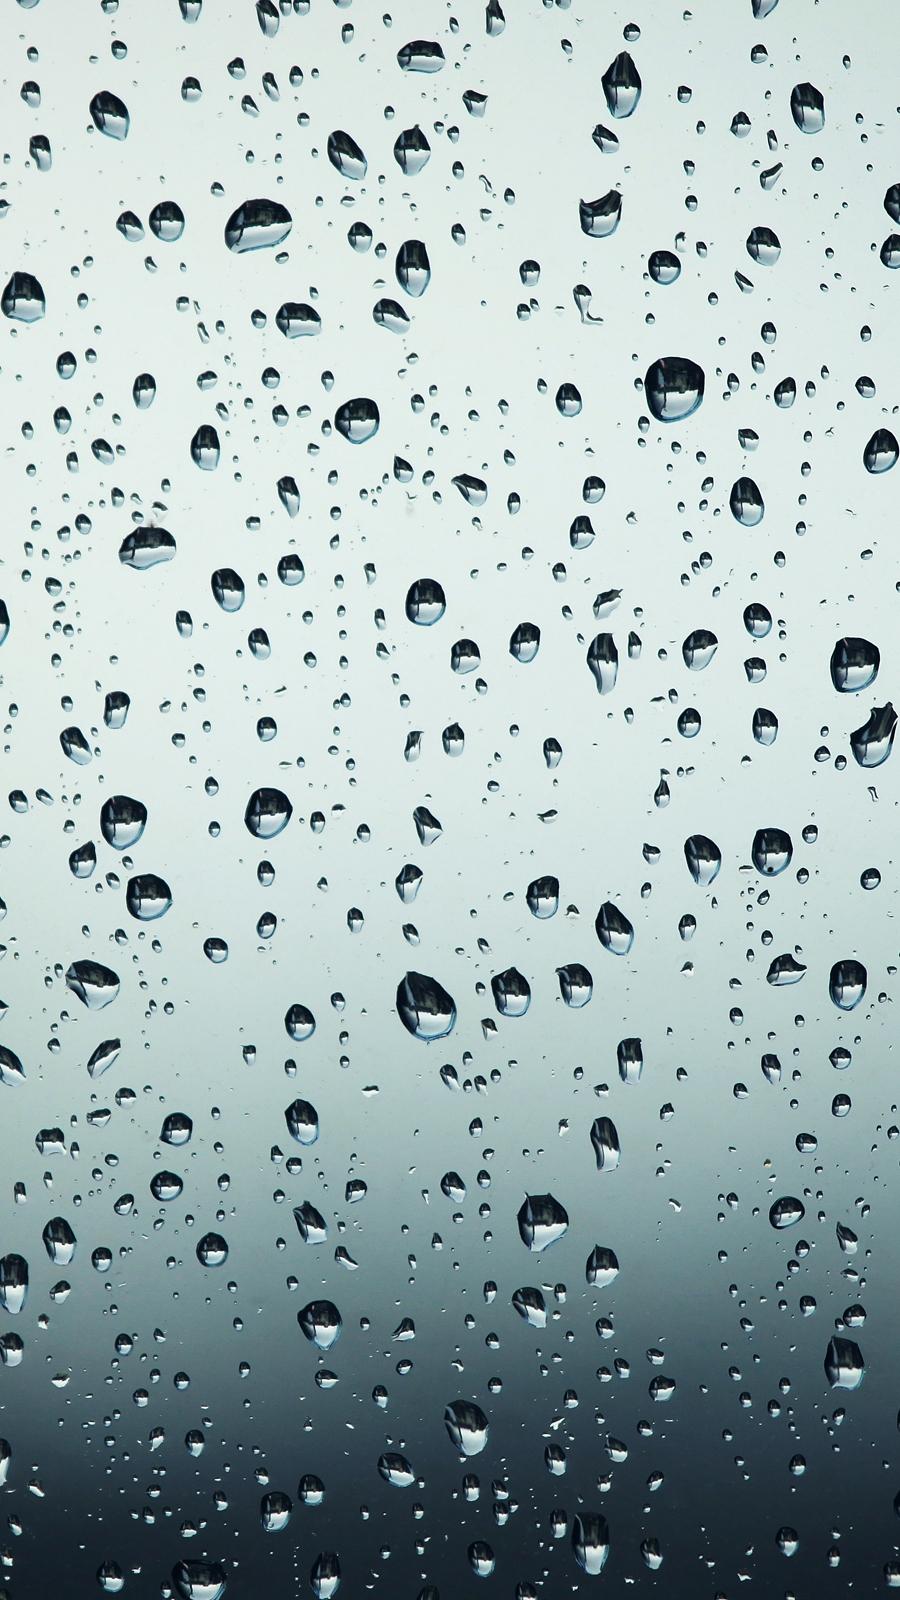 Live Wallpaper Rain On Screen - Android Home Screen Wallpaper For Phone , HD Wallpaper & Backgrounds